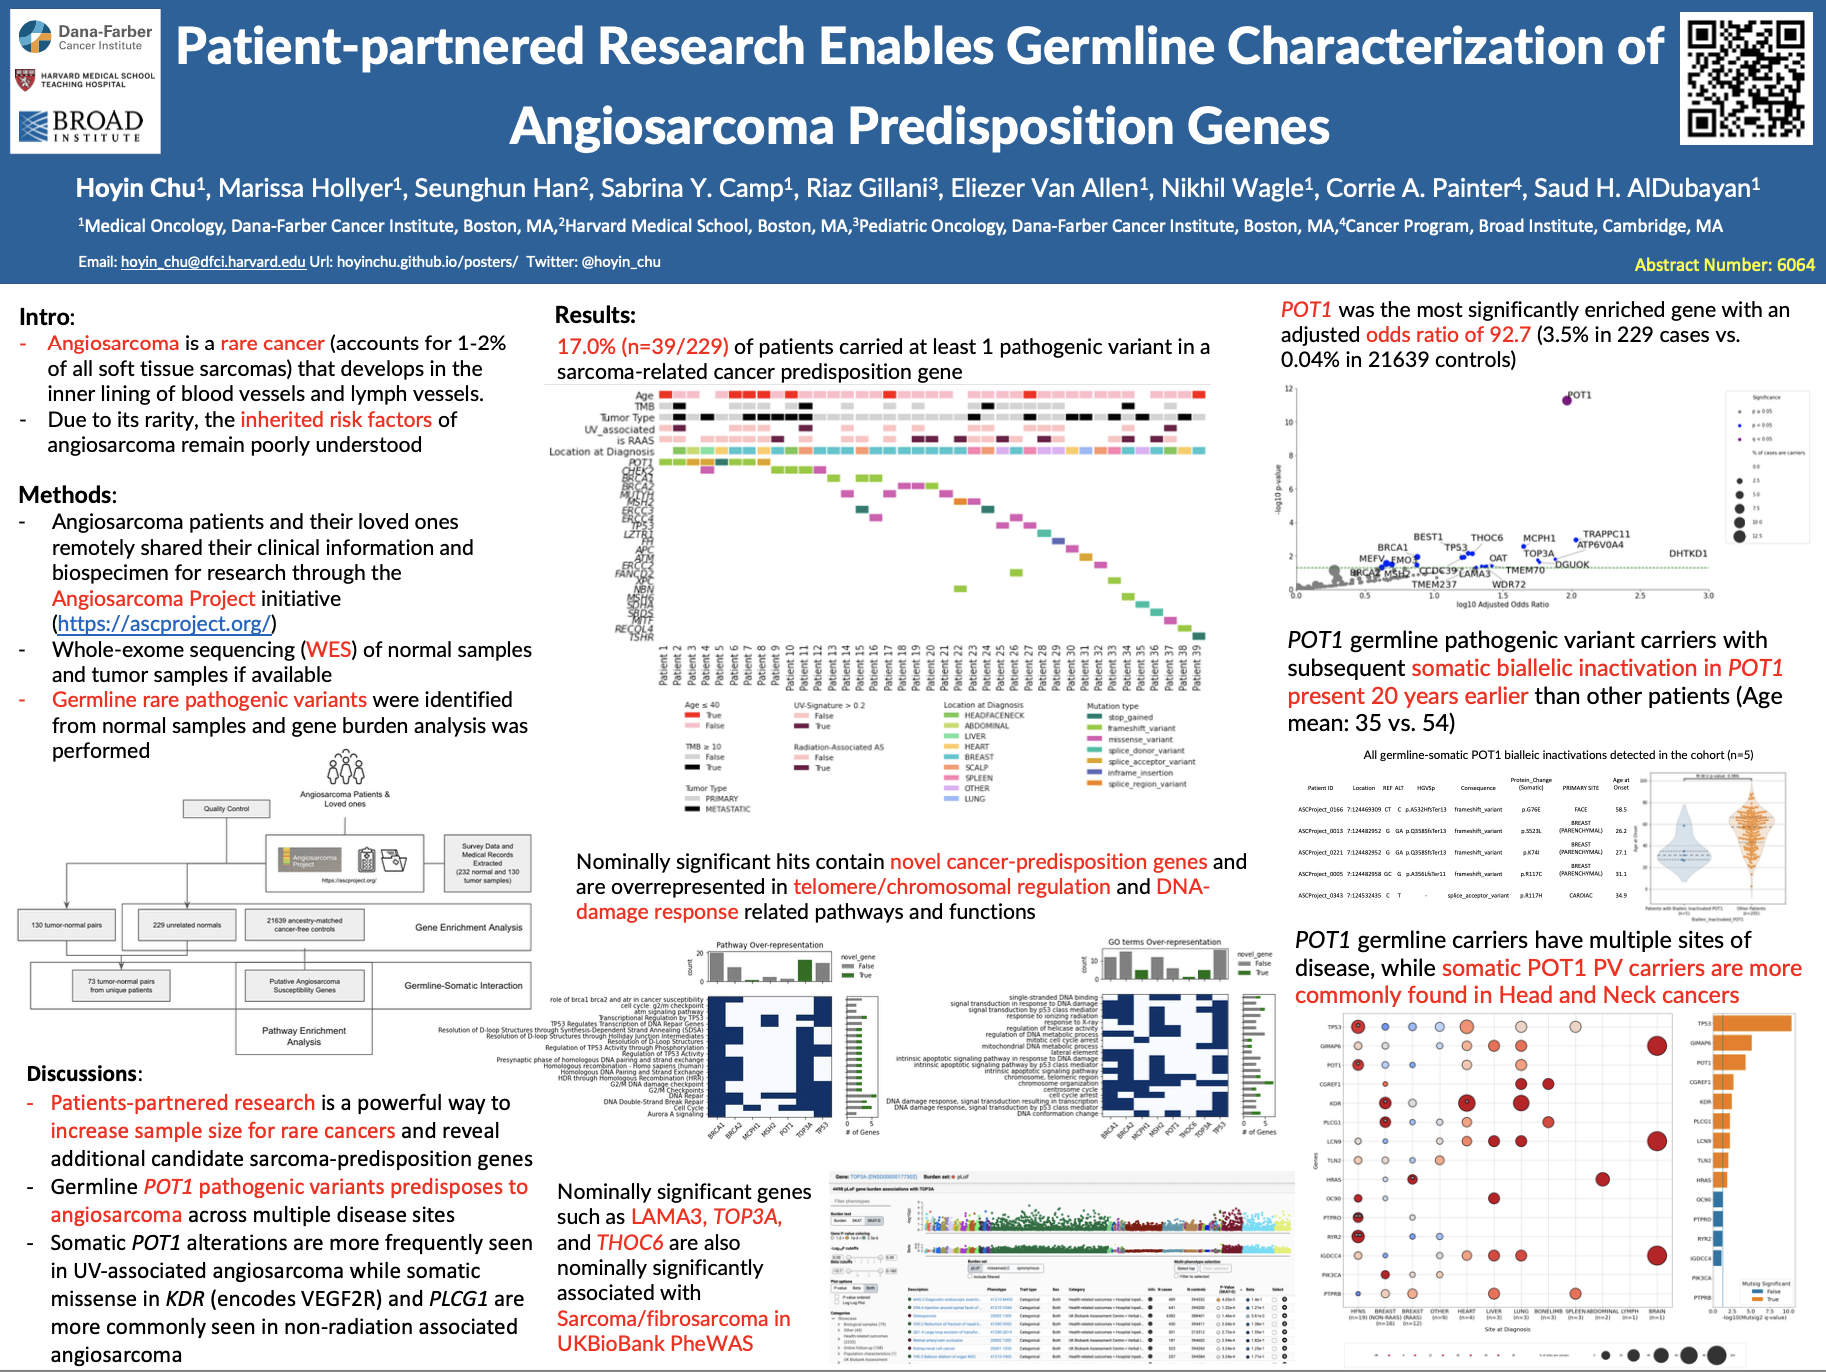 AACR 2023 Poster Presentation